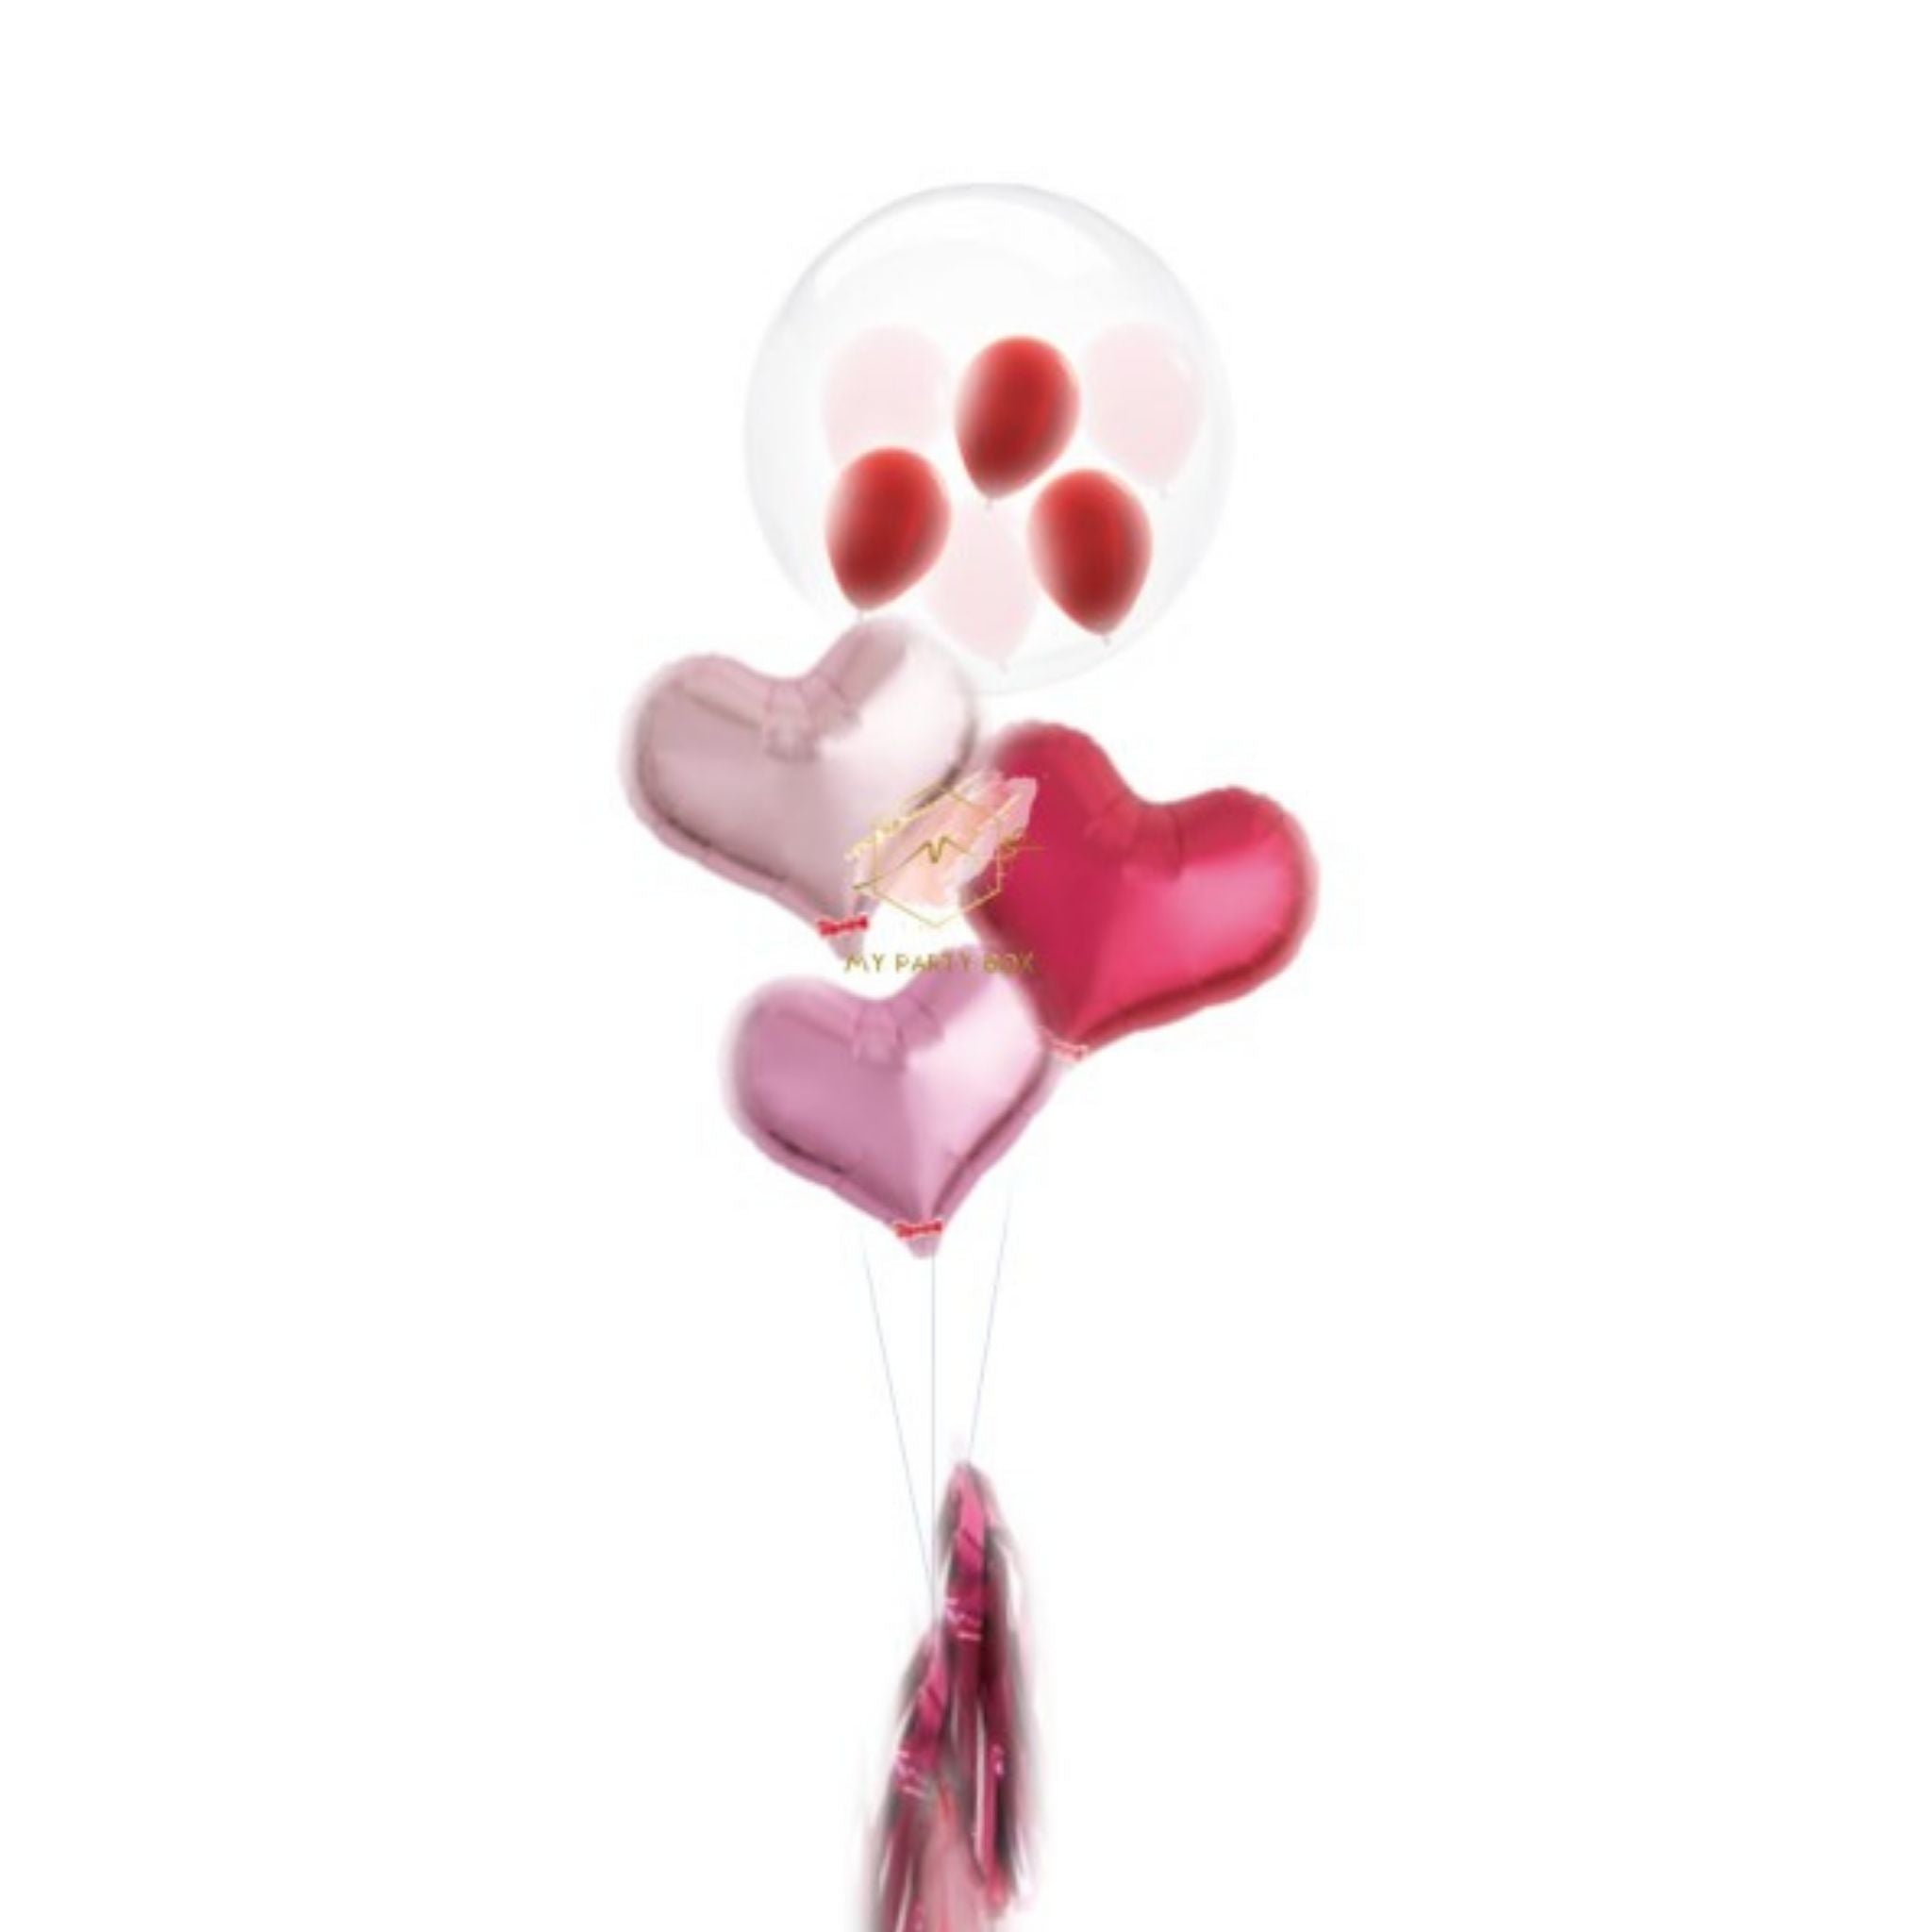 My Party Box Bubble Gum Balloon Bouquet with one bubble balloon with mini latex balloon inside and one light pink foil heart balloon, one red foil heart balloon and pink Heart Balloon